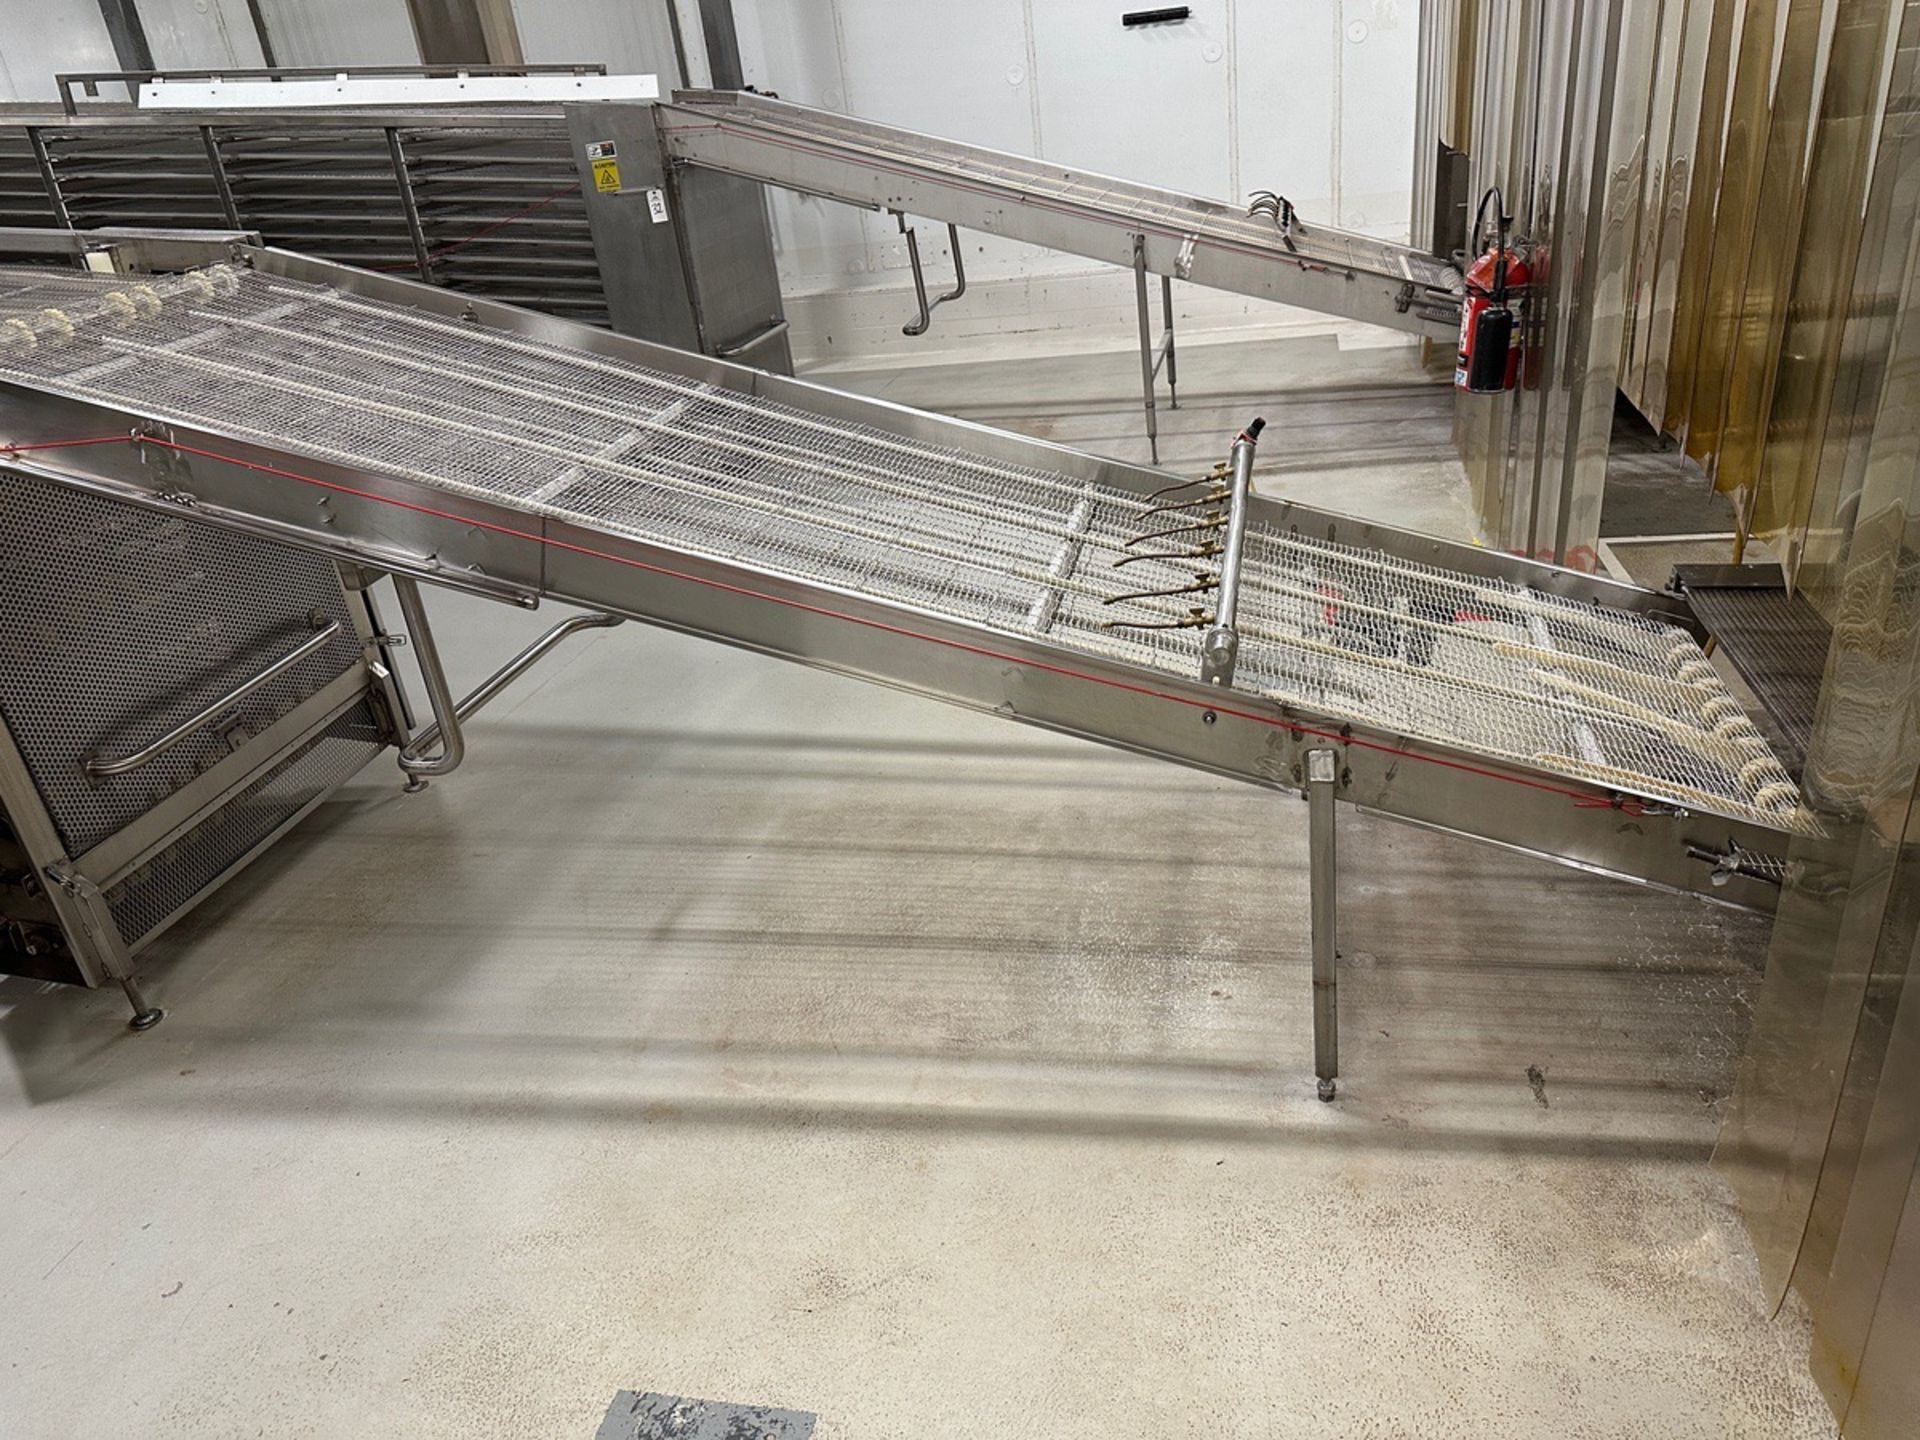 Stainless Steel Cooling Conveyor with 3' Belt Width | Rig Fee $1250 - Image 2 of 5